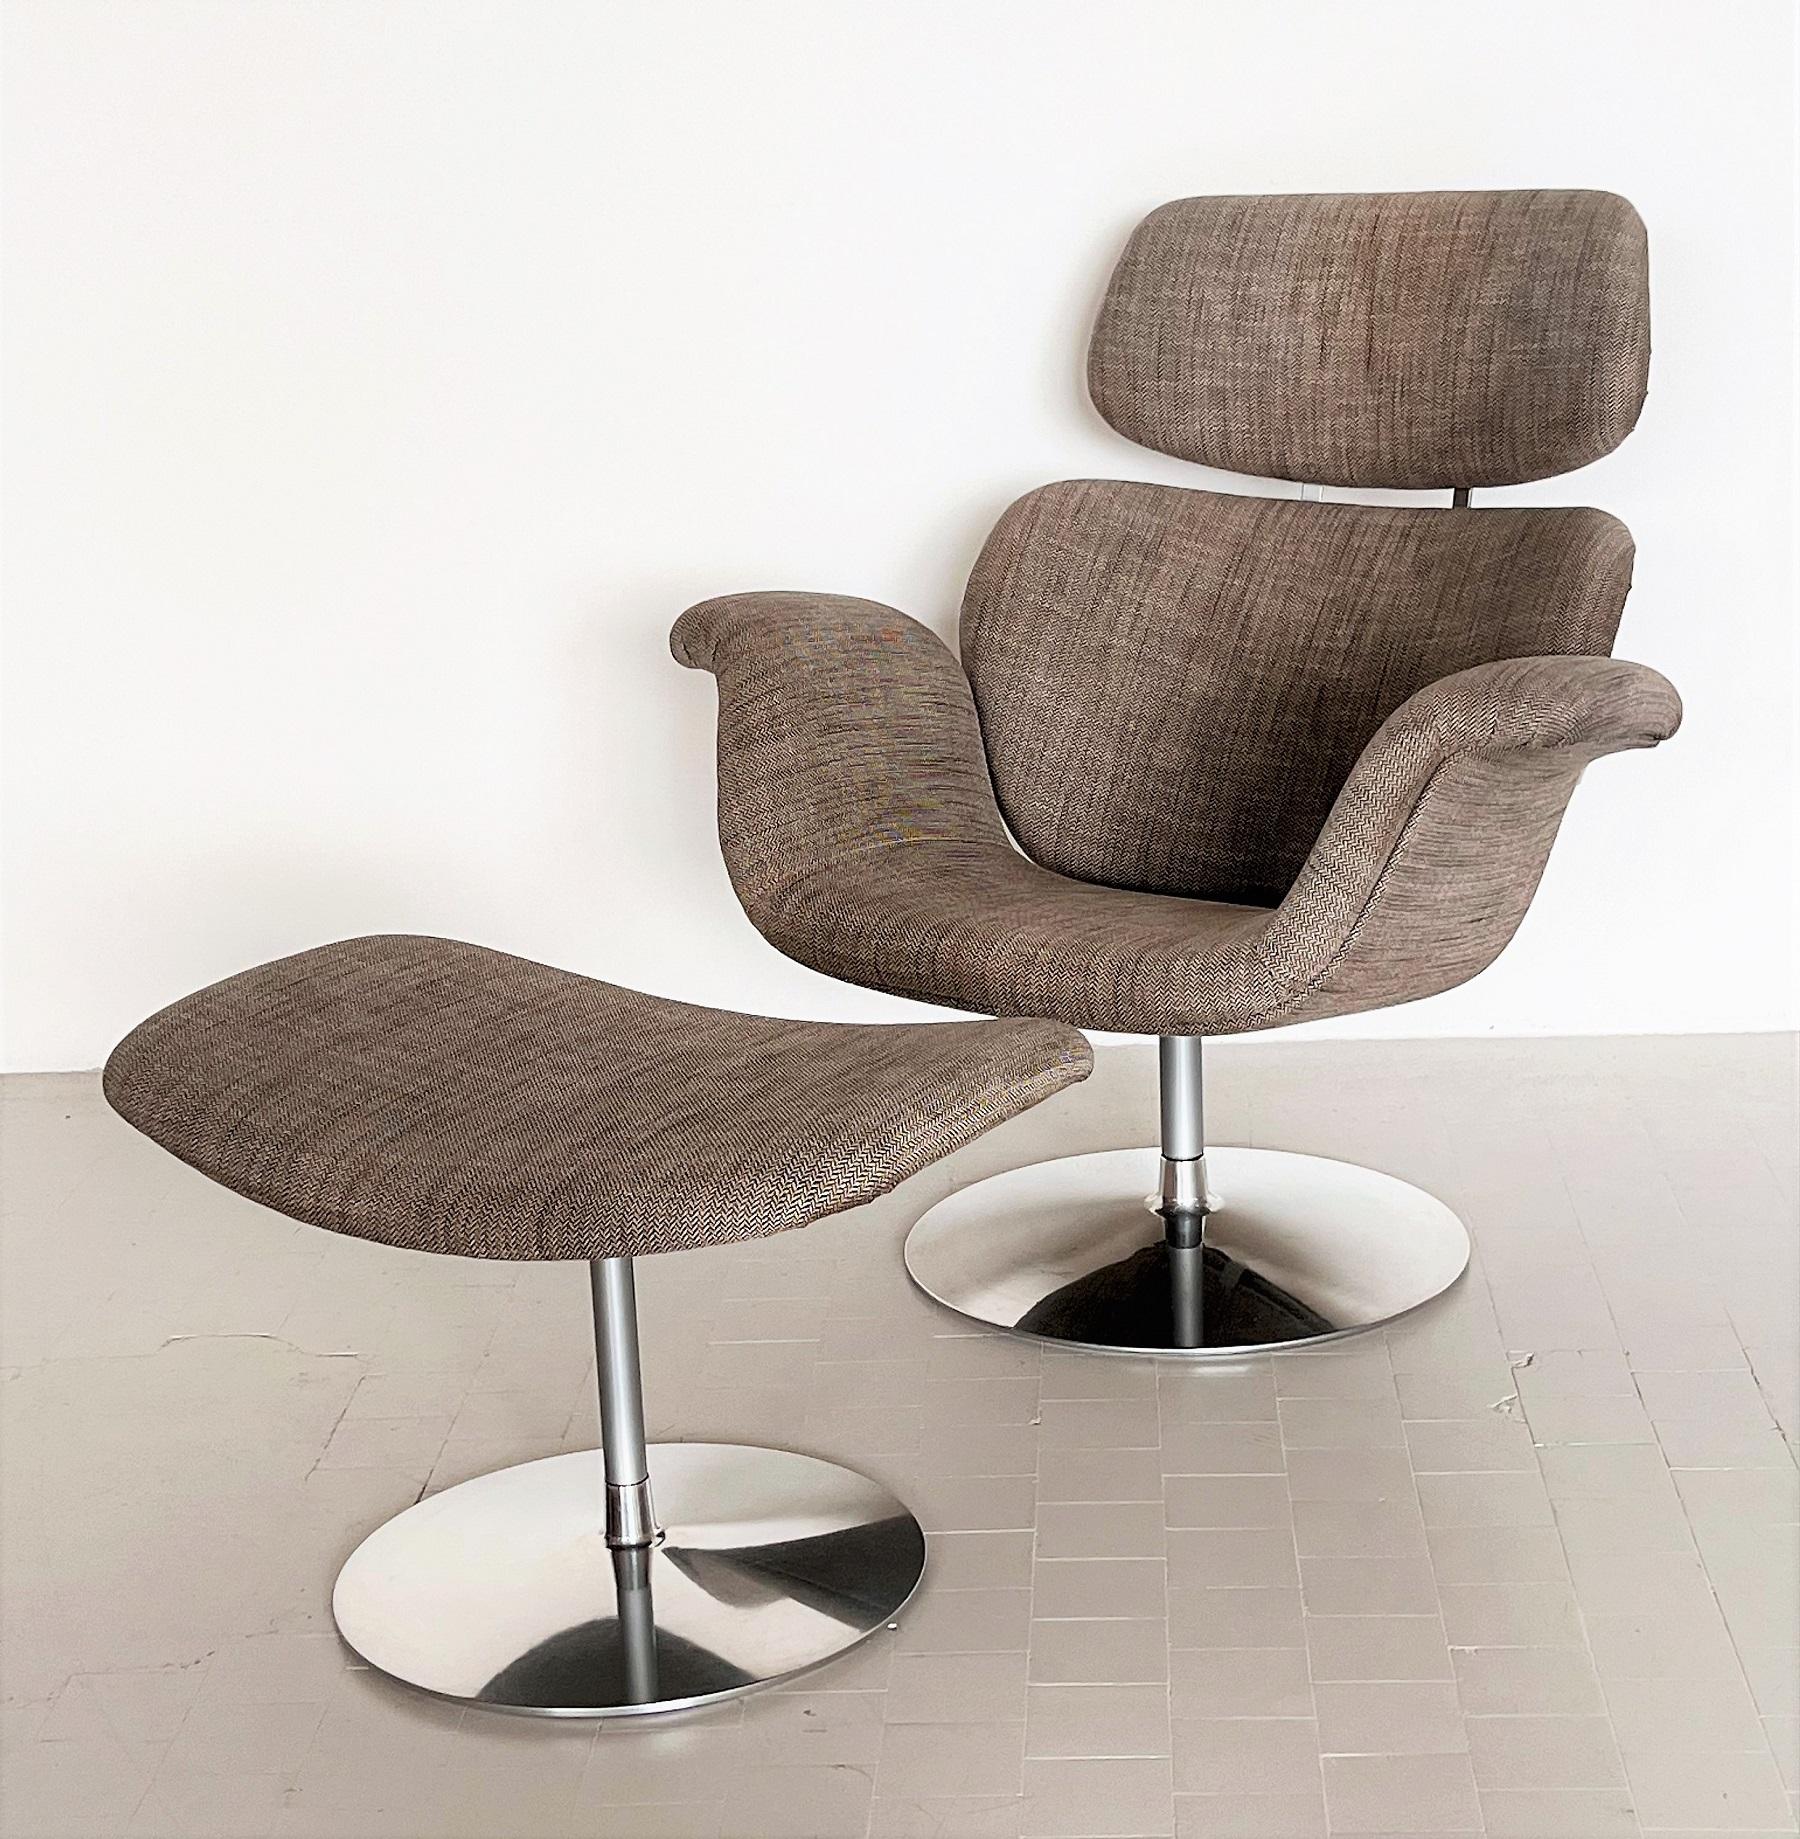 Original Big Tulip lounge chair with Ottoman, designed by Pierre Paulin in 1965 and produced by Artifort in the 1980s.
This early edition has a round, pivoting metal foot.
Original wool fabric from the manufacturer in lovely herringbone pattern that